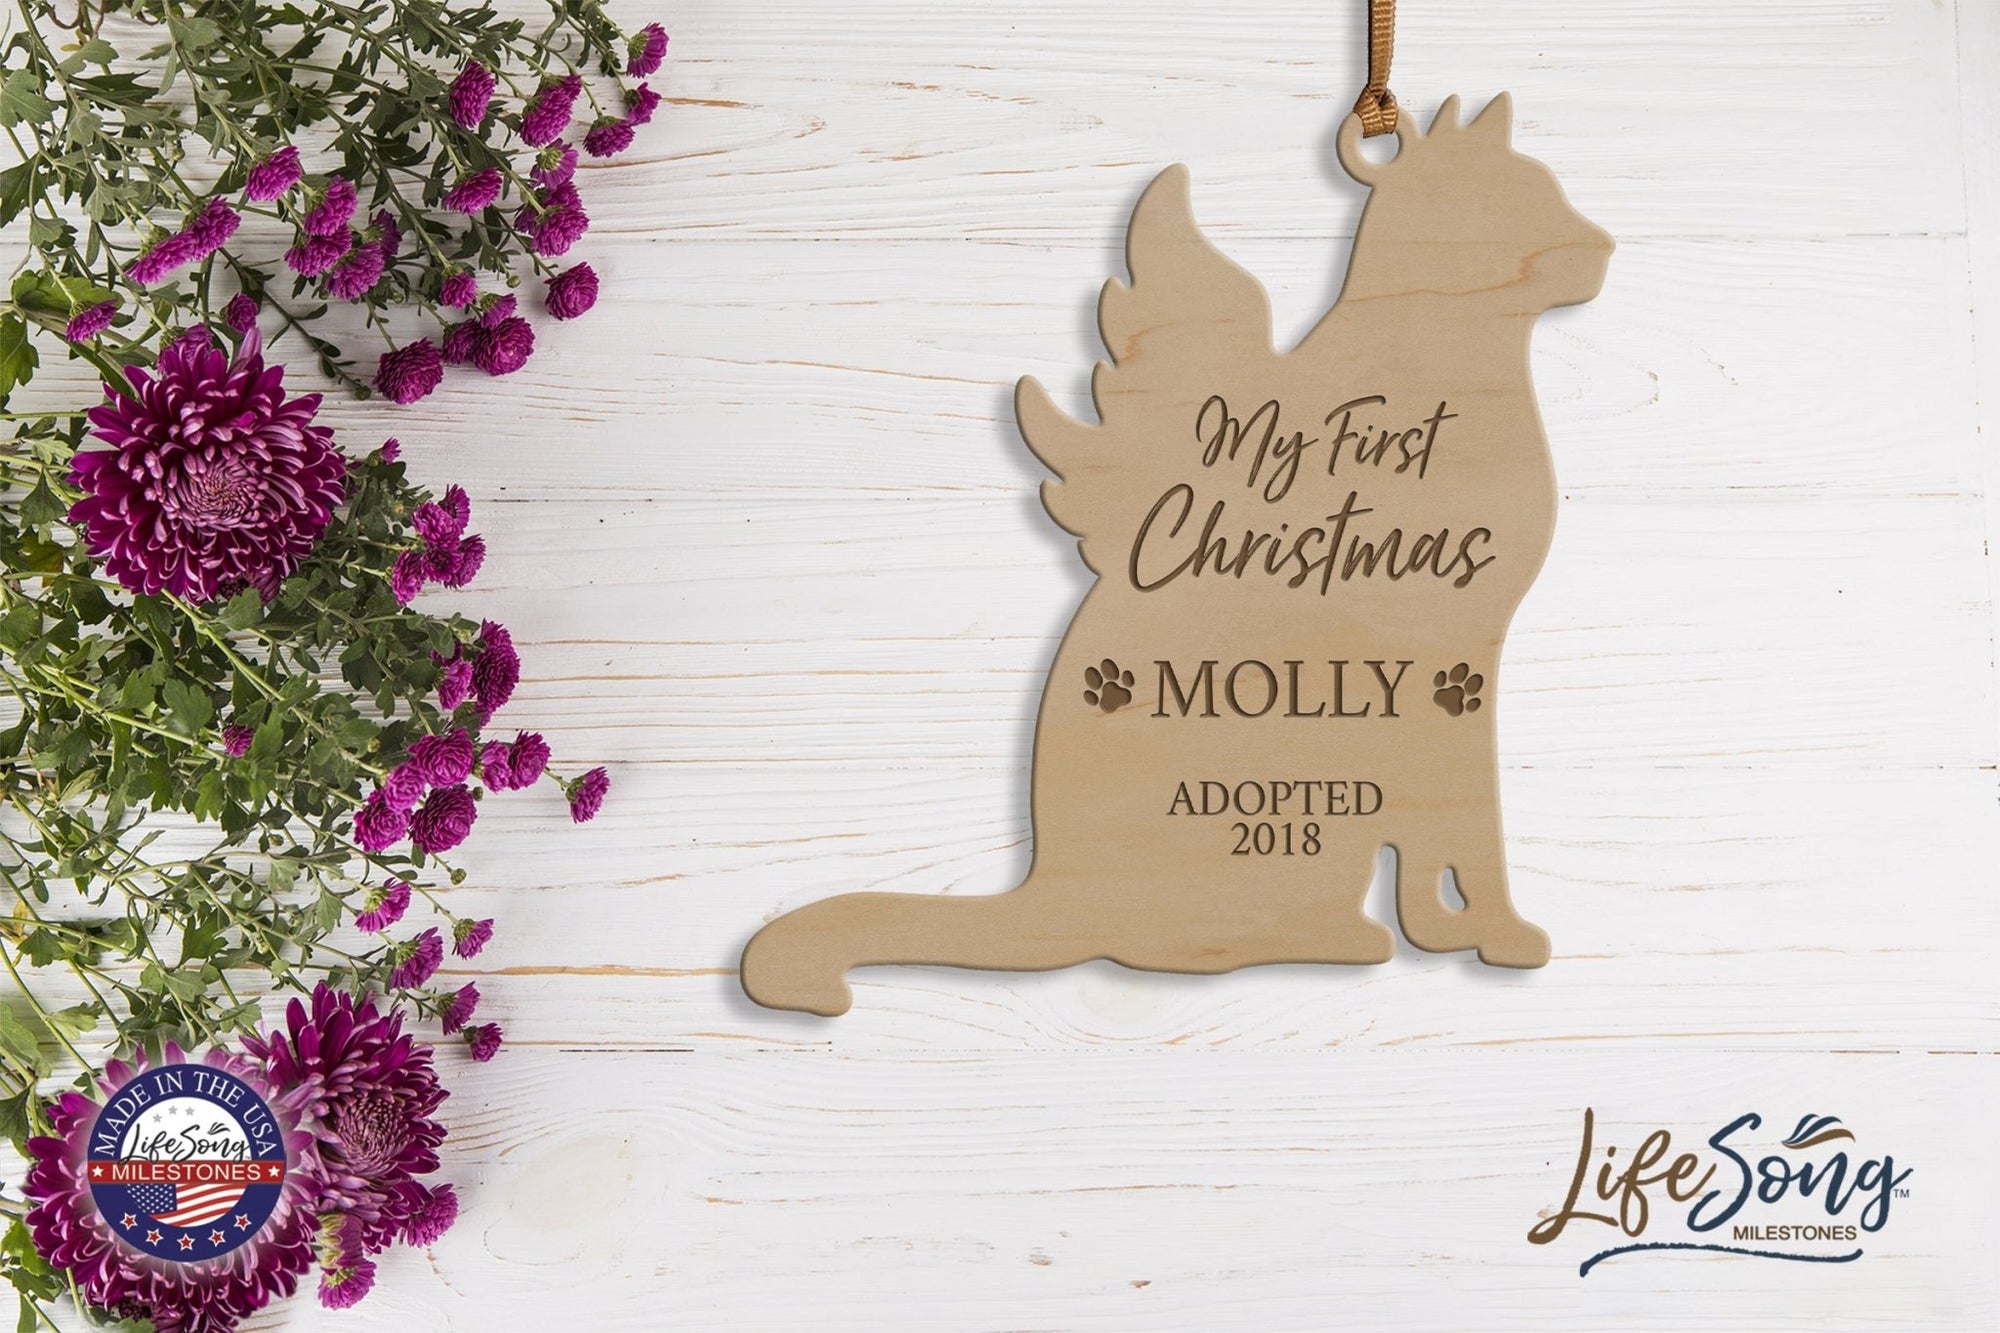 Personalized Engraved Christmas Cat Ornament 4.9375” x 5.375” x 0.125” - My first Christmas (PAWS) - LifeSong Milestones